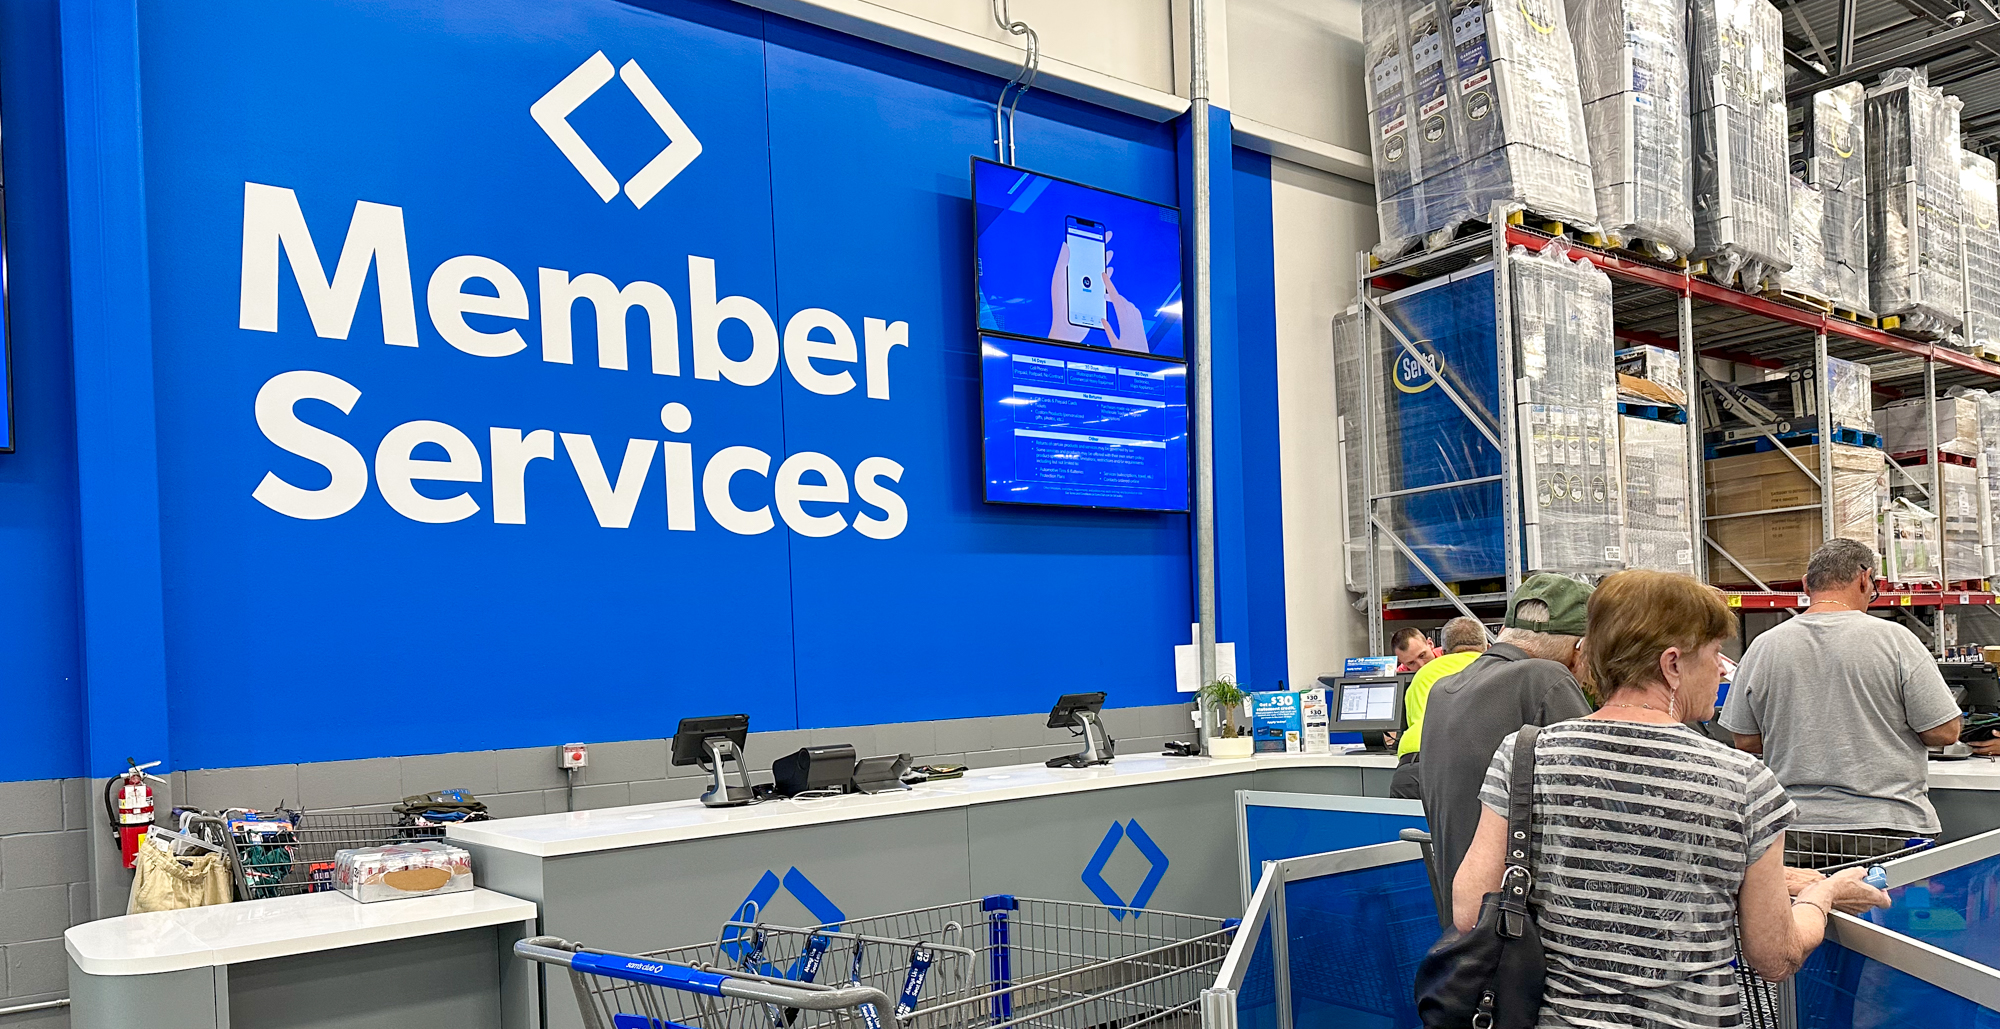 Sam's Club Membership Cost Increase 2022 - The Krazy Coupon Lady